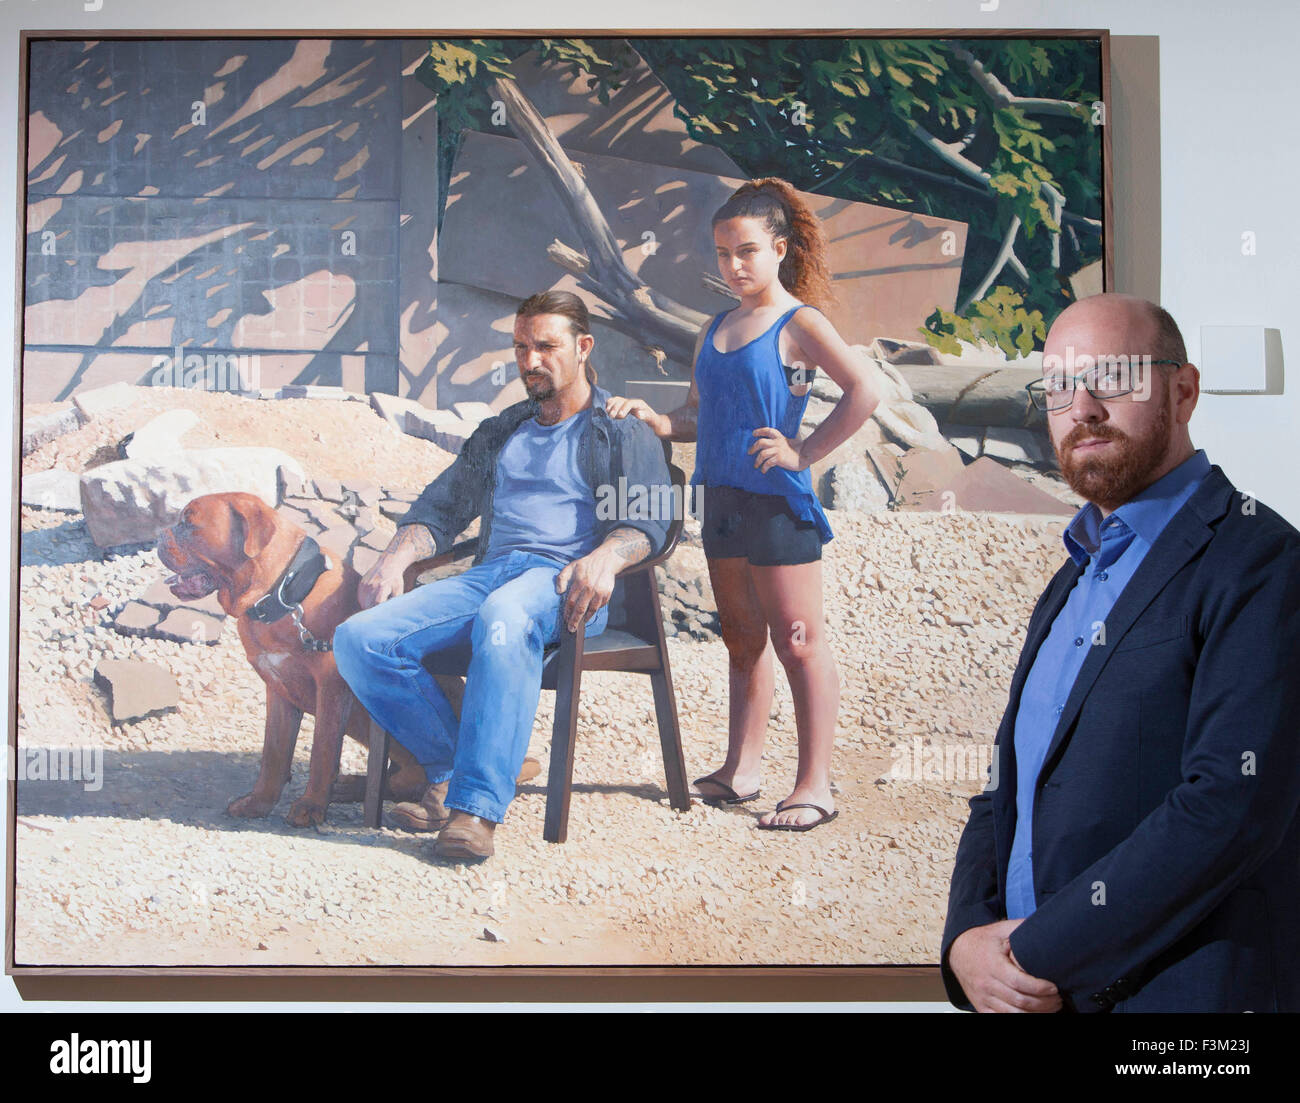 Edinburgh.UK. 9th October. BP Portrait Display in Scottish National Portrait Gallery. BP Portrait Award display in Edinburgh 10 October 2015 - 28 February 2016. Pictured Matan Ben-Cnaan, author of the 1st Prize with Annabelle and Guy. 2015. Pako Mera/Alamy Live News. Stock Photo